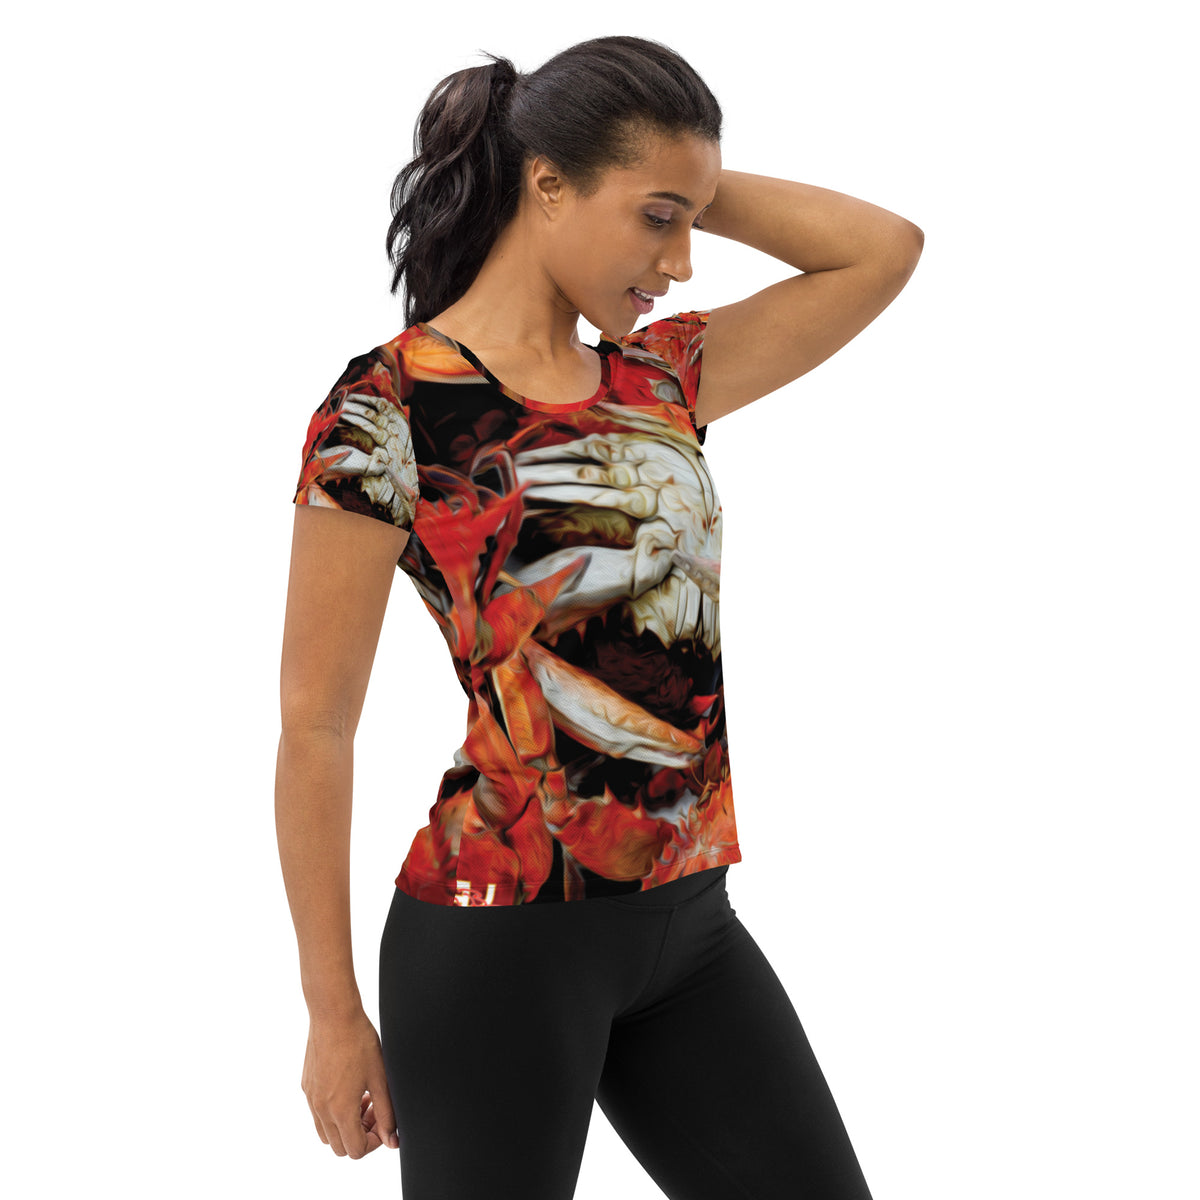 Ladies Jewel of the Chesapeake Crab All-Over Athletic Tee